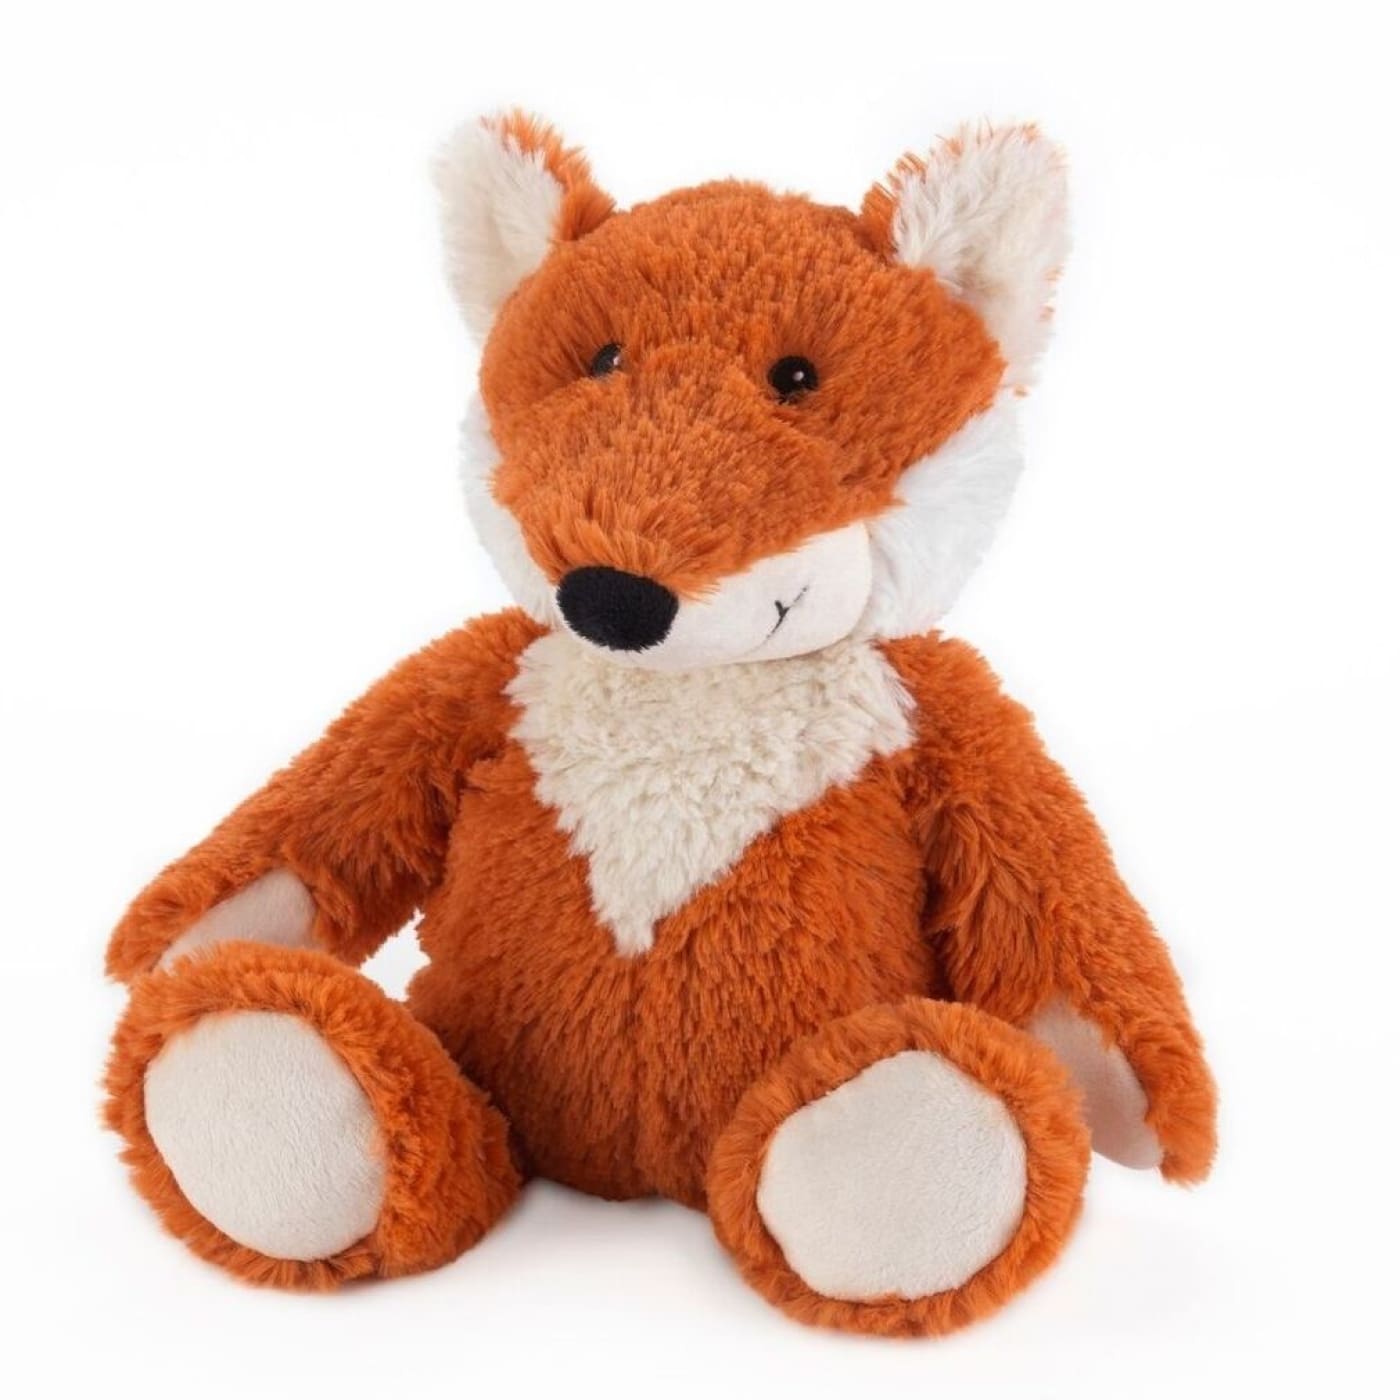 Warmies Cozy Plush - Fox - Fox - HEALTH & HOME SAFETY - THERMOMETERS/MEDICINAL